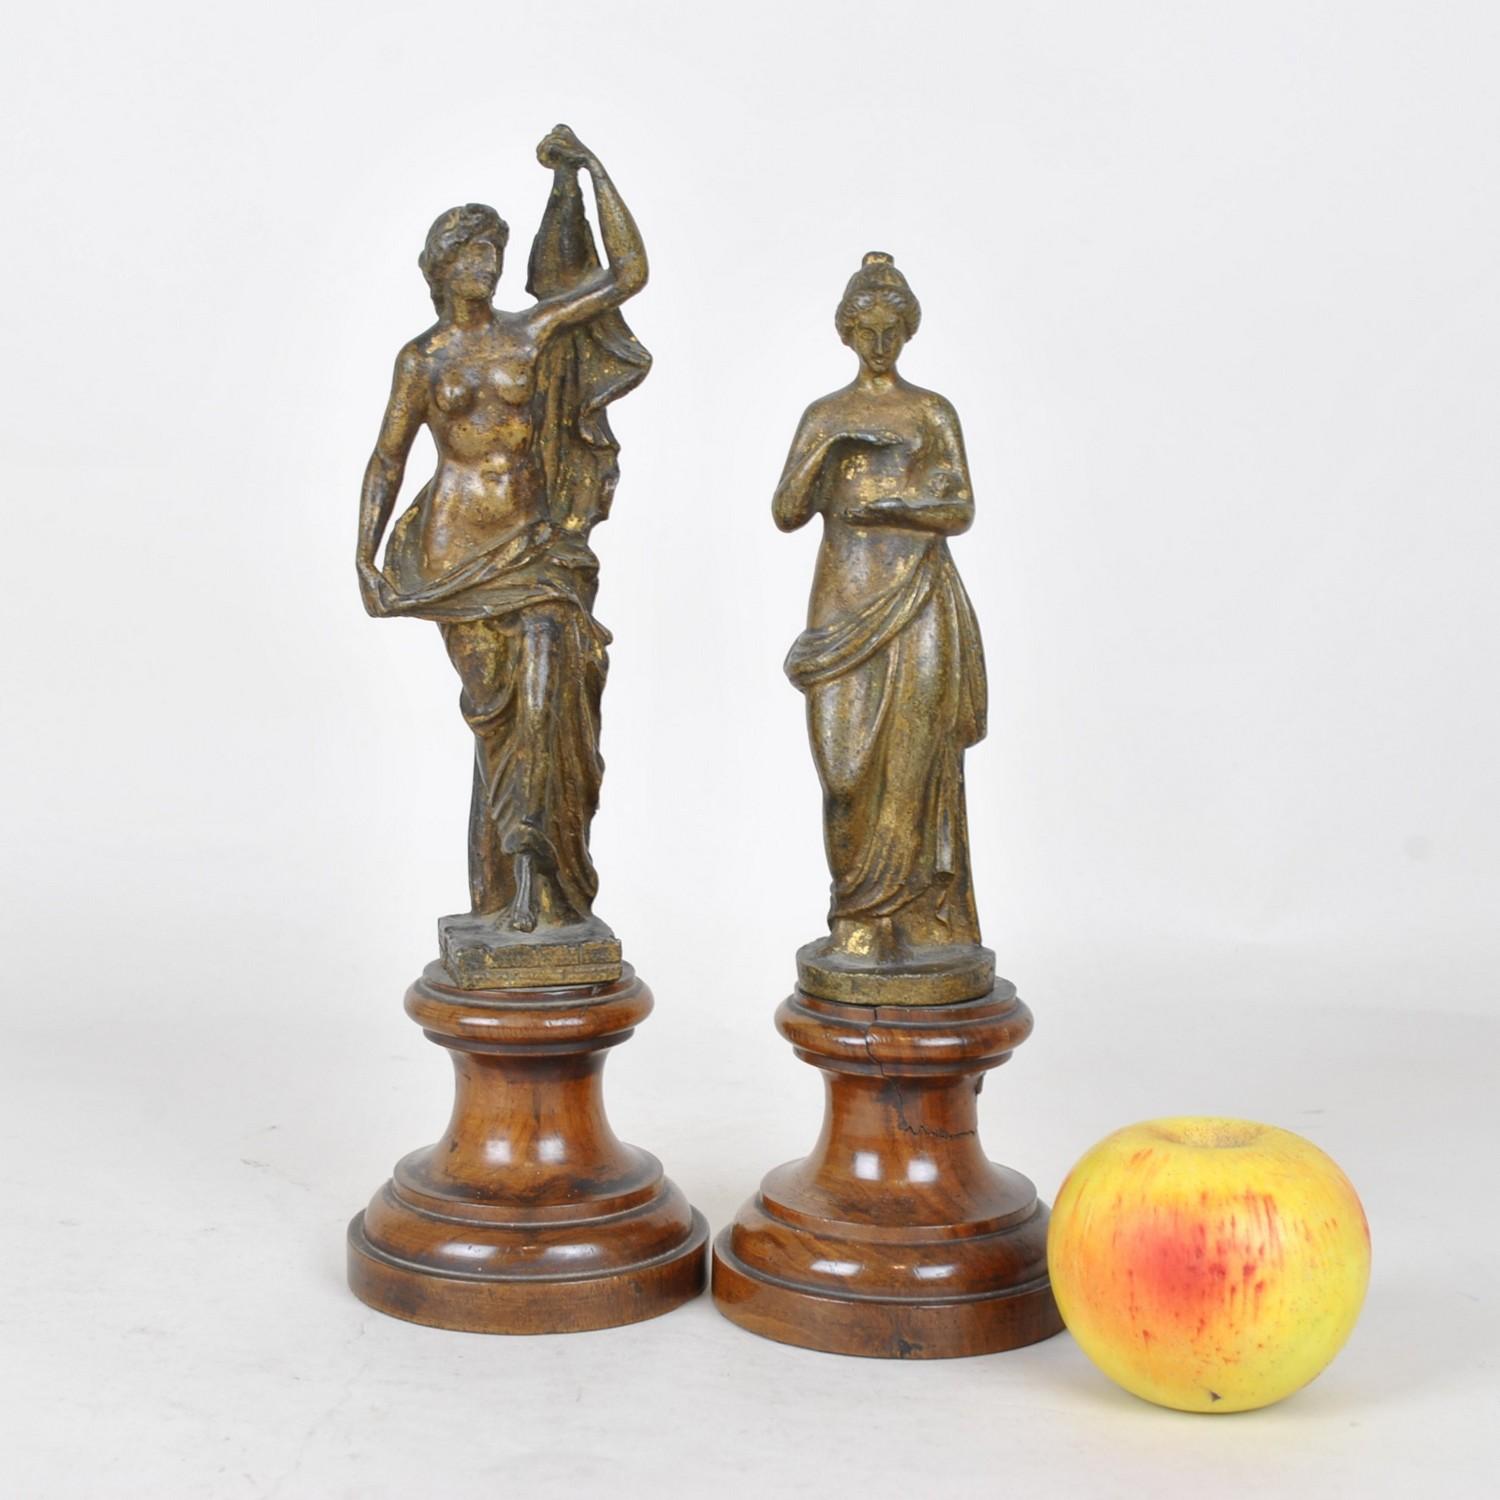 Antique women, two brown patina bronzes of women standing in draped dresses

Wooden bases

Patina wear (traces of old gilding)

19th century

Height 30 and 28cm
Diam 9.5cm approximately